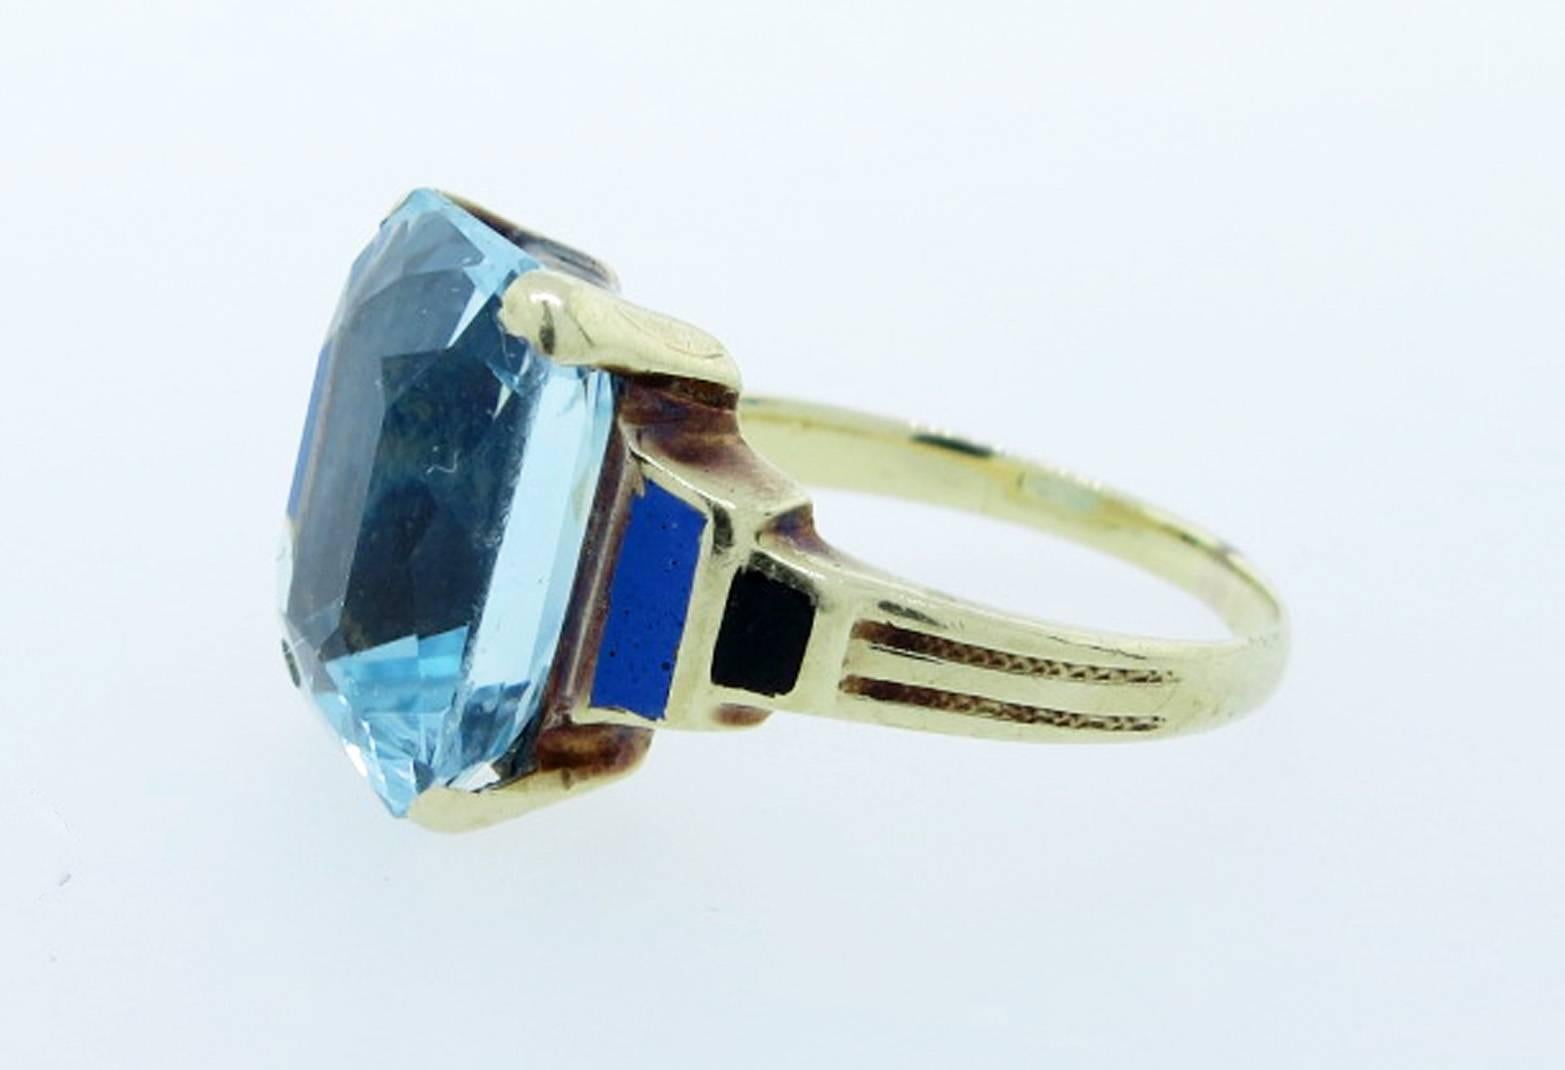 Period Art Deco 14kt. yellow gold ring prong set with faceted fine blue rectangular cushion natural aquamarine center. The ring is made by the Newark maker Allsopp & Long.  The aqua measures 12mm. x 10mm. and weighs approx 5.0cts . Each side of the